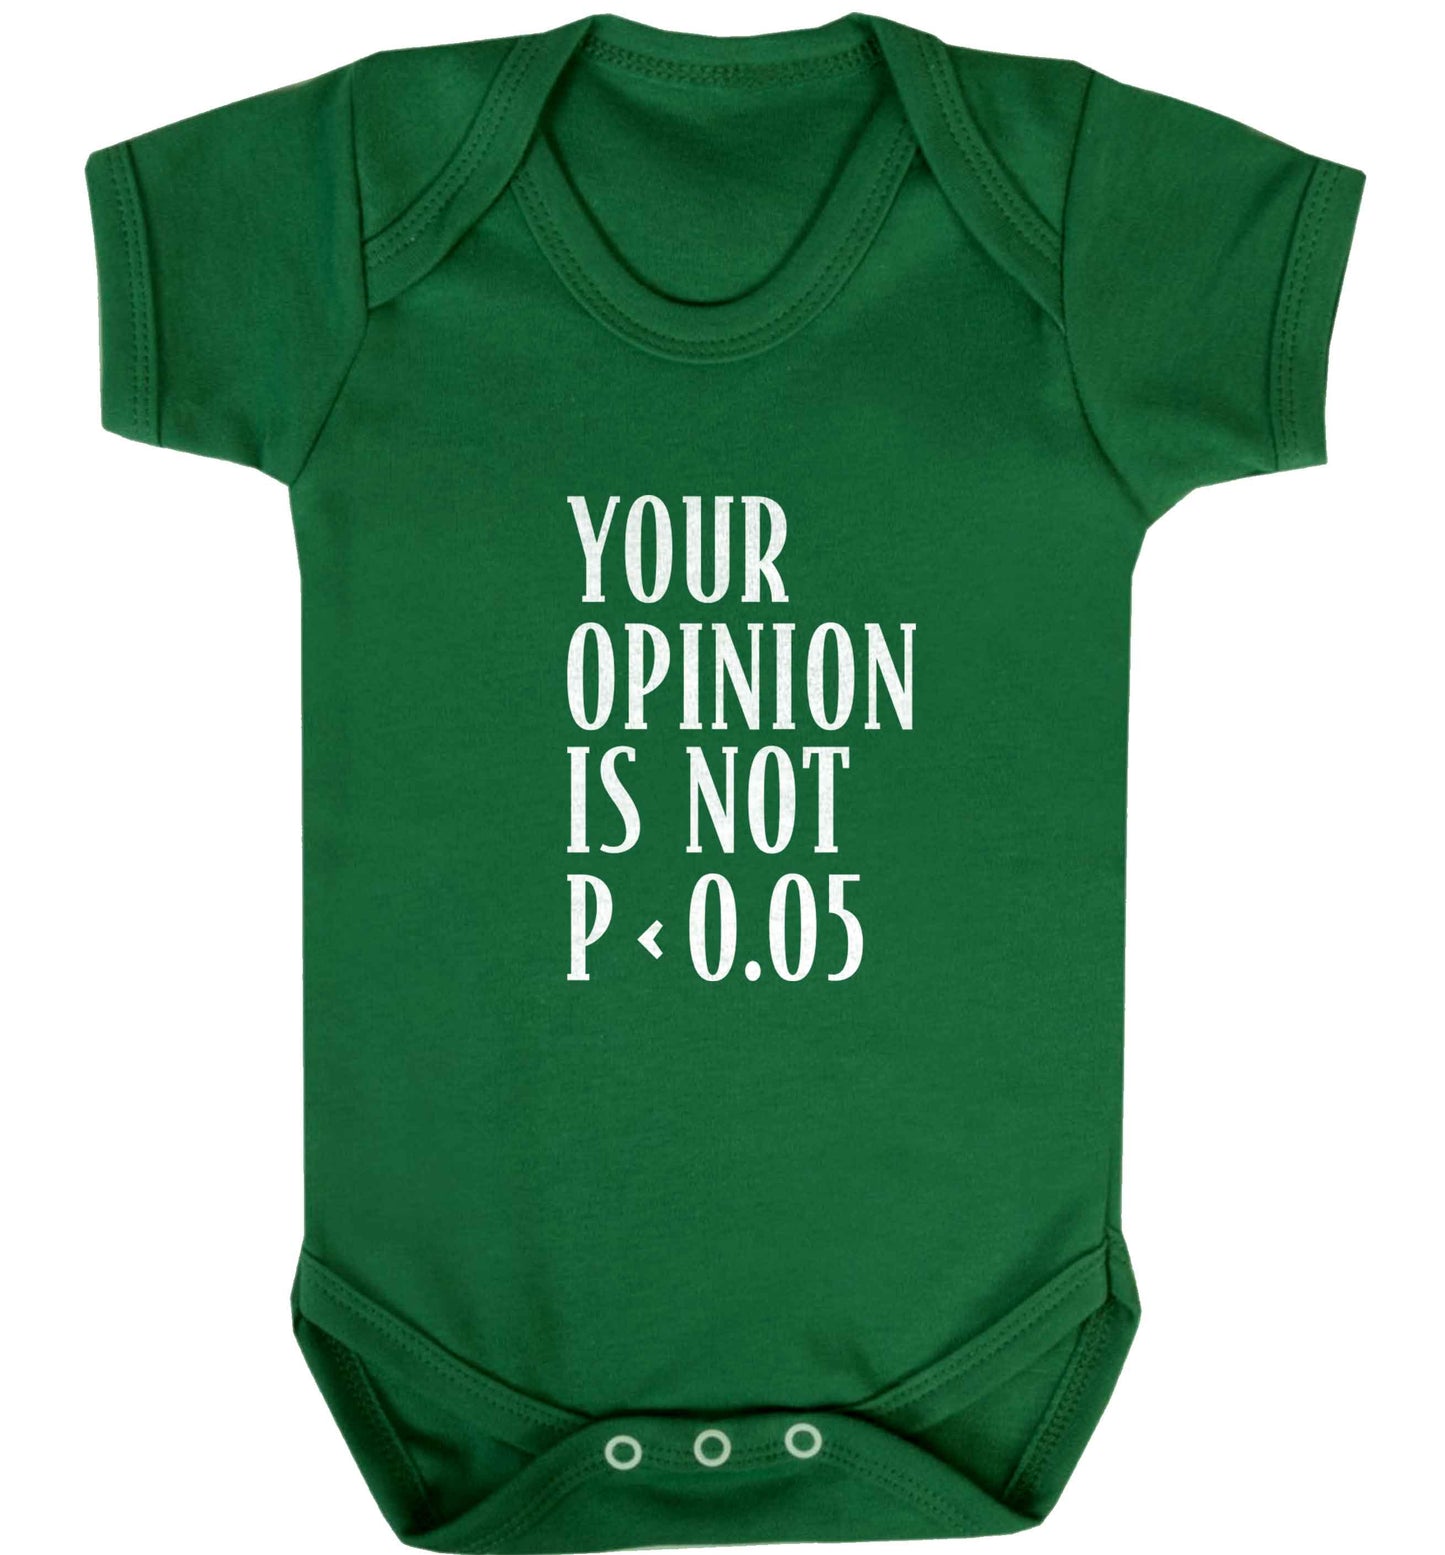 Your opinion is not P < 0.05baby vest green 18-24 months